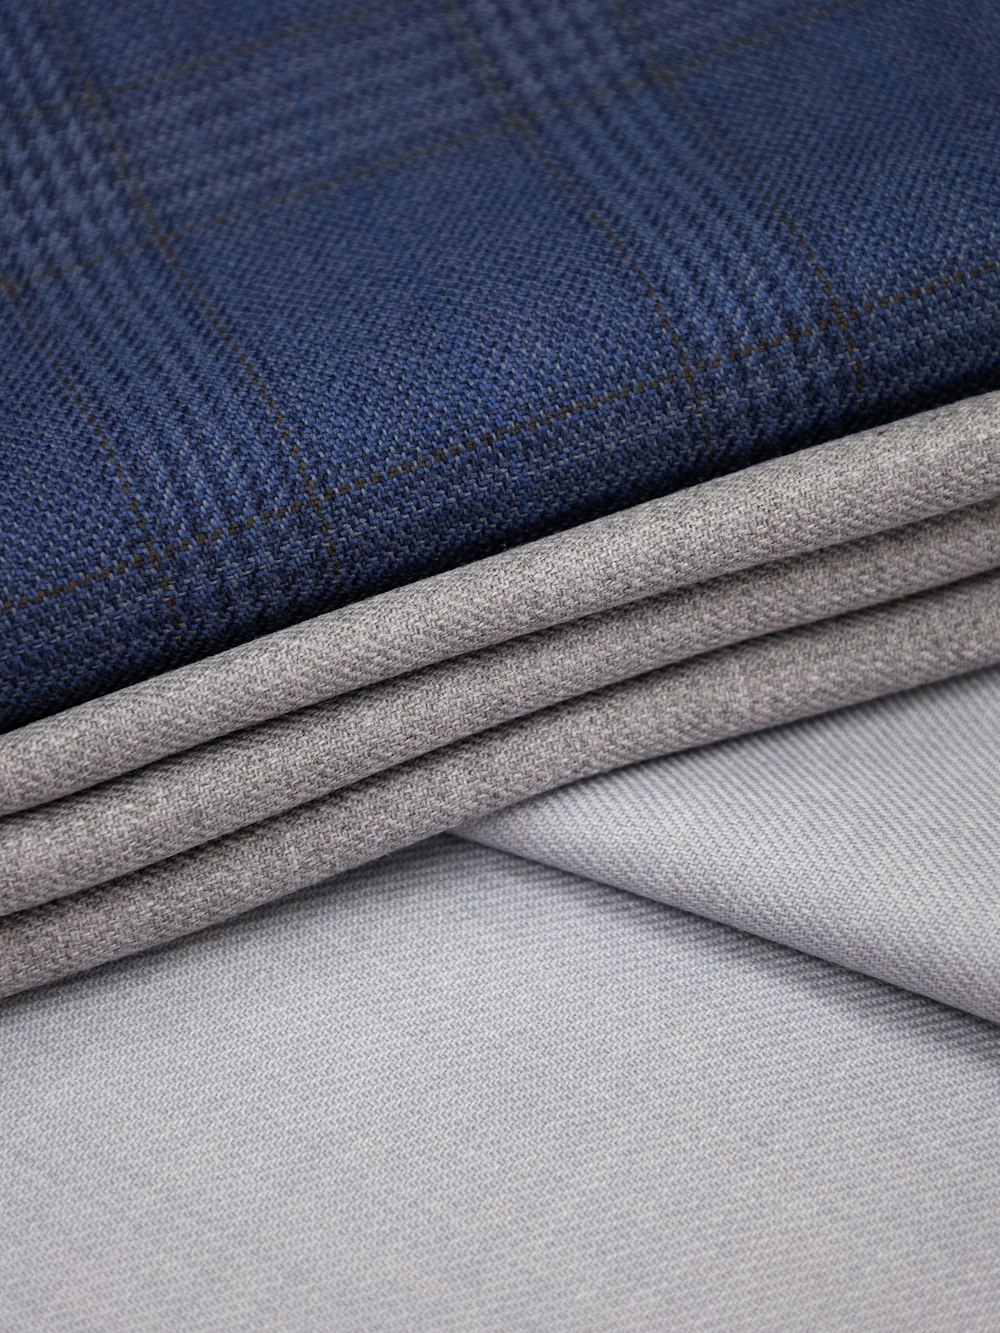 a close up of a blue and grey fabric